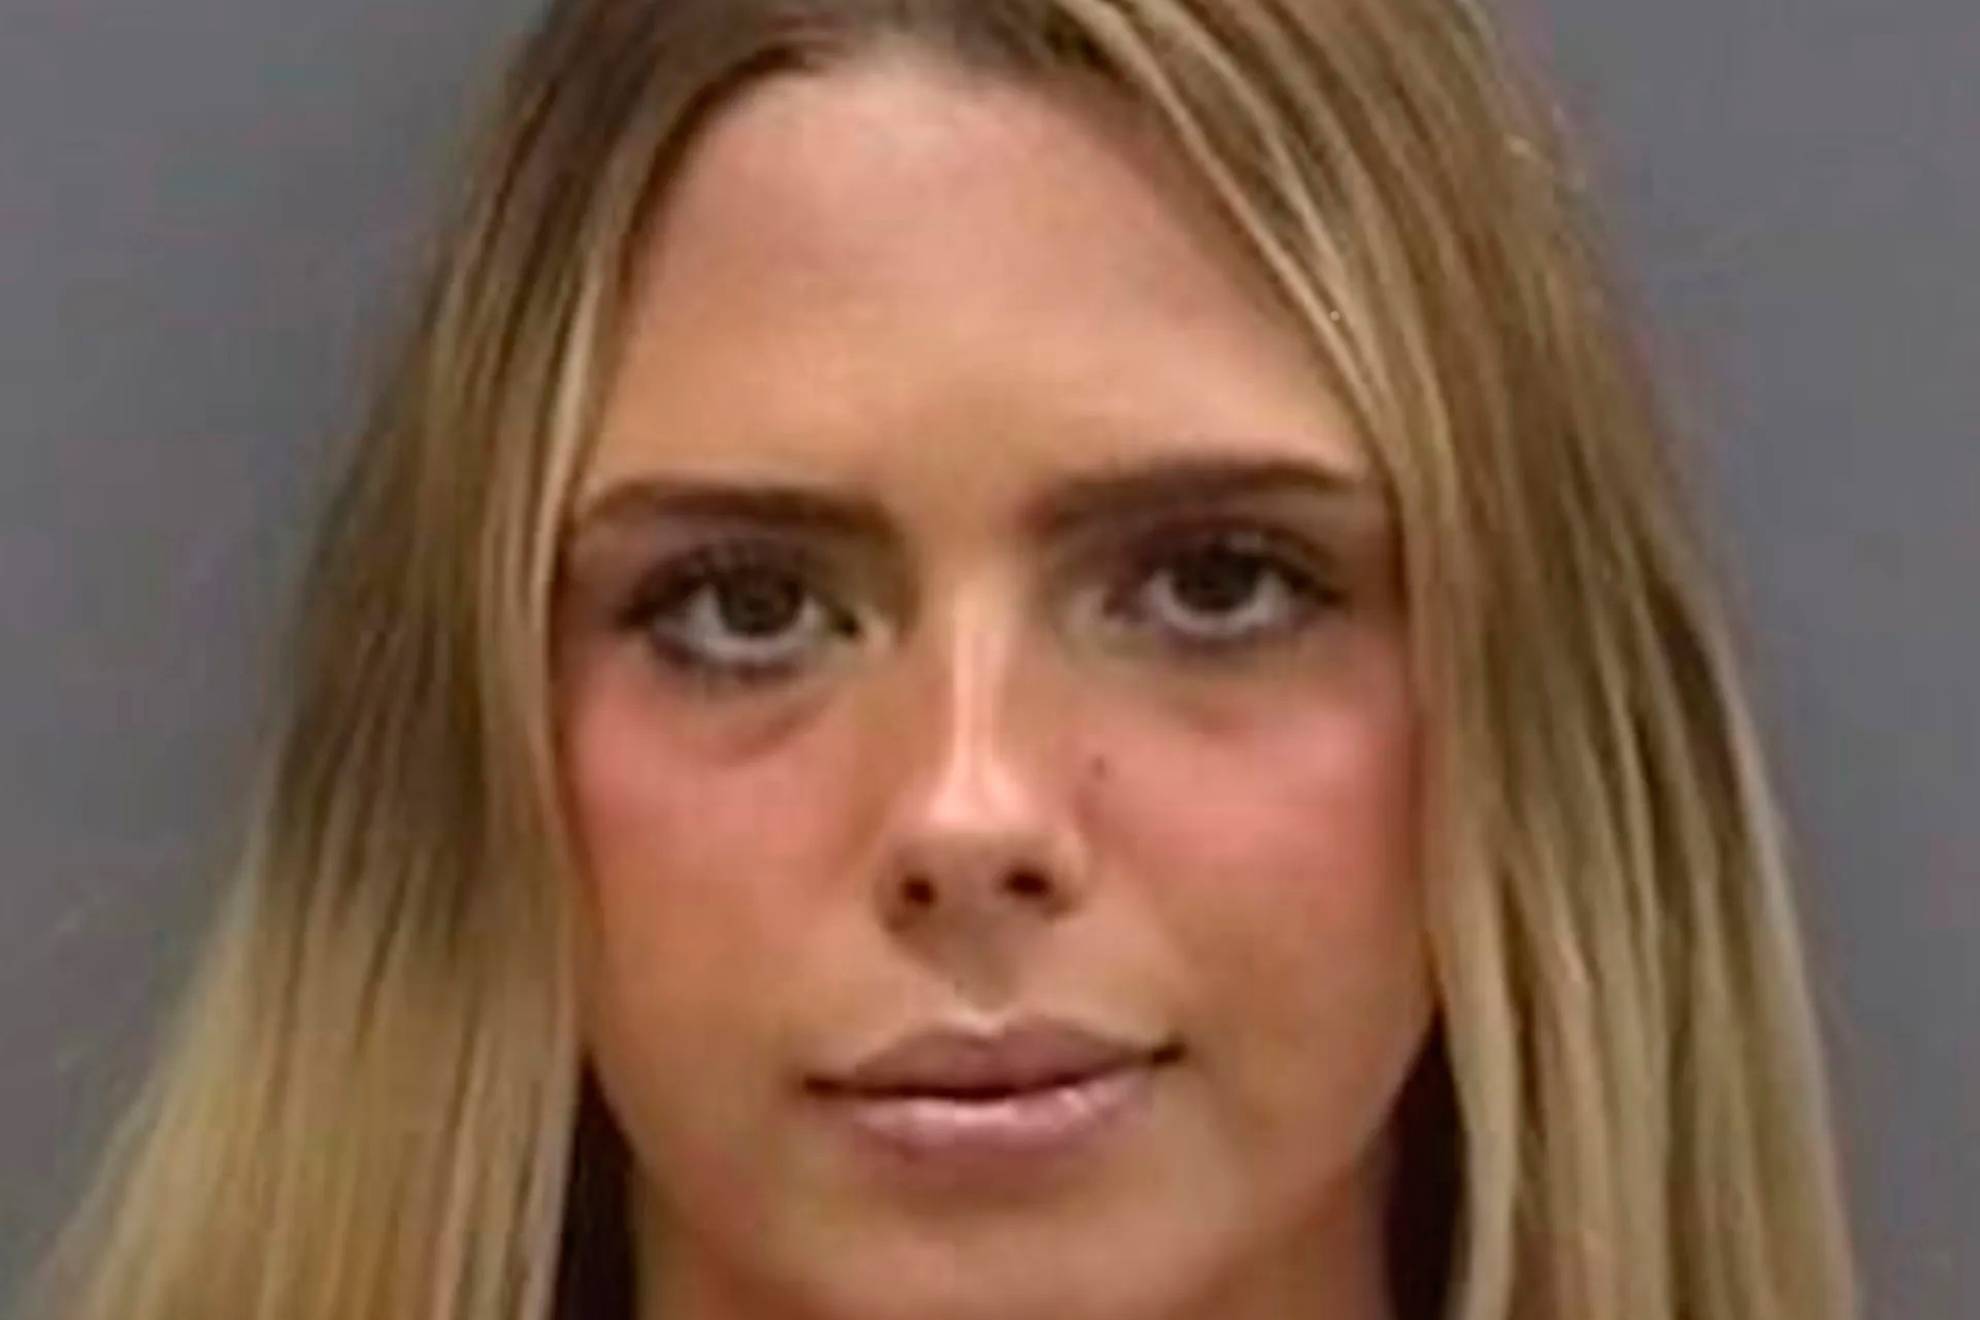 Alyssa Porn - Influencer Alyssa Ann Zinger arrested for pretending to be 14 so she could  abuse minors | Marca